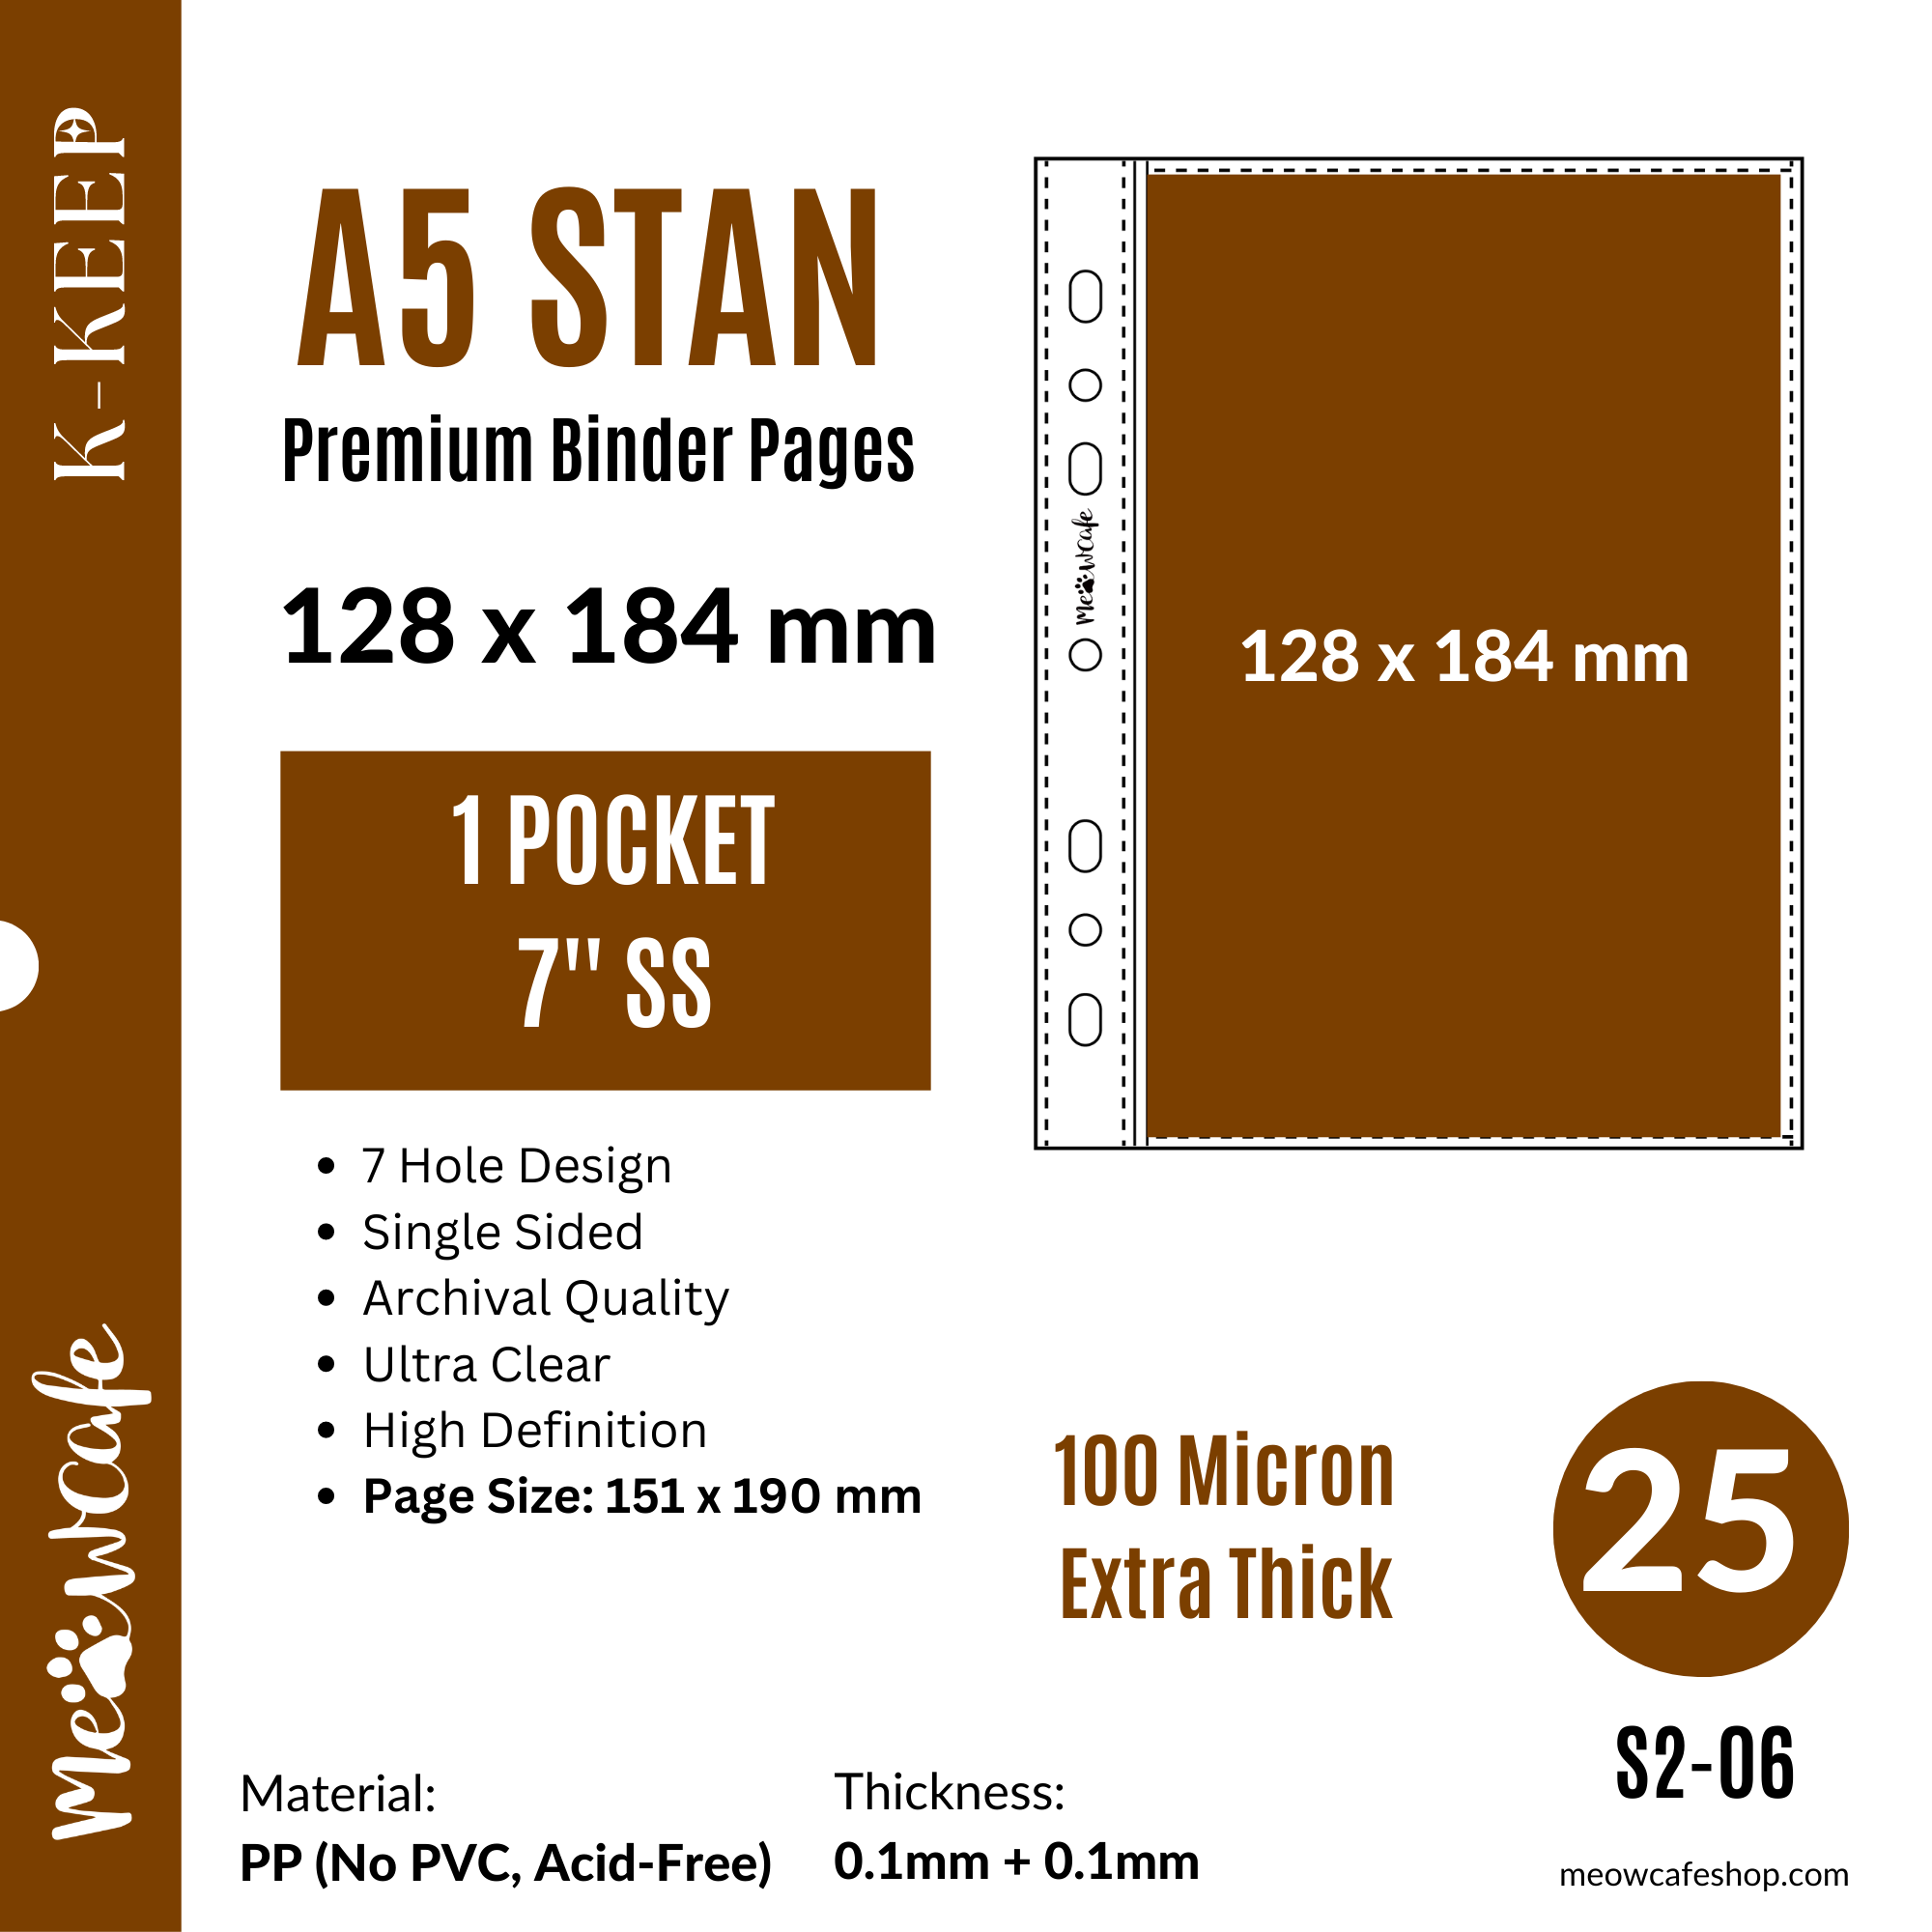 K-KEEP [A5 Standard] - 1 Pocket 7 inch (128x184mm)- 7 Holes Premium Binder Pages, 100 Micron Thick, High Definition (Pack of 25)  S2-06